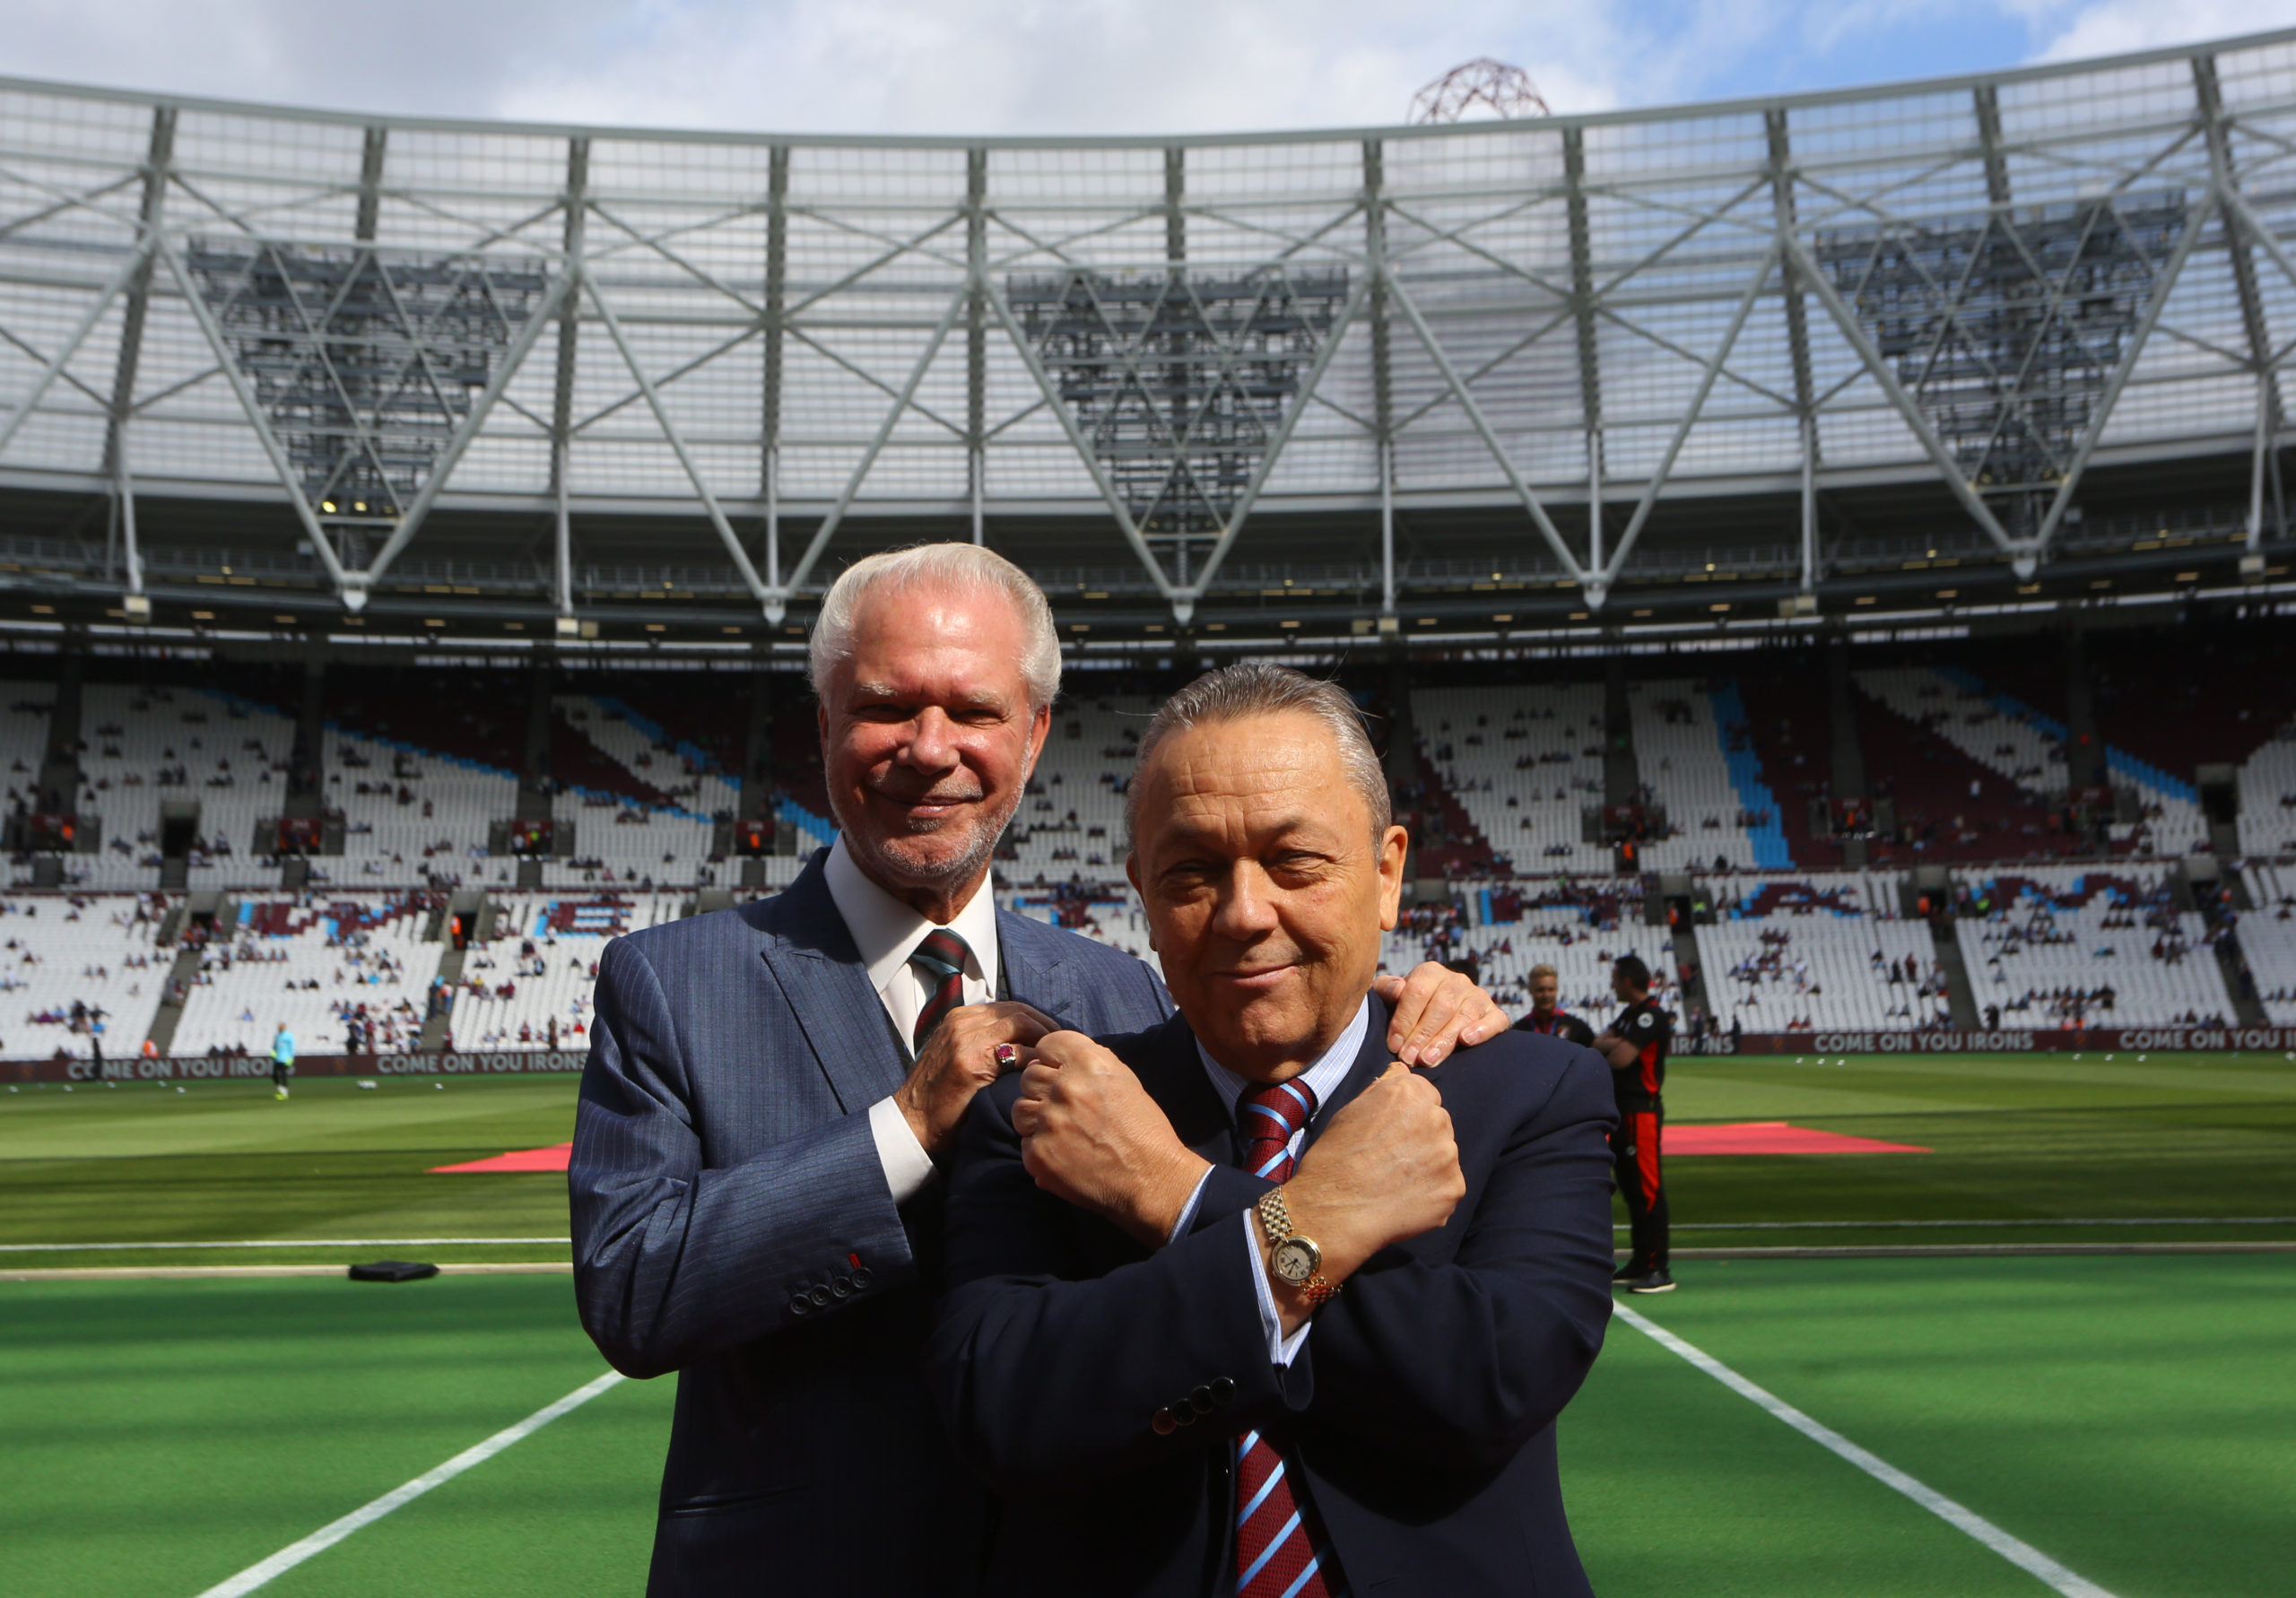 David Sullivan and David Gold mark 12 years since West Ham takeover but transfers are now key for reaching fabled next level